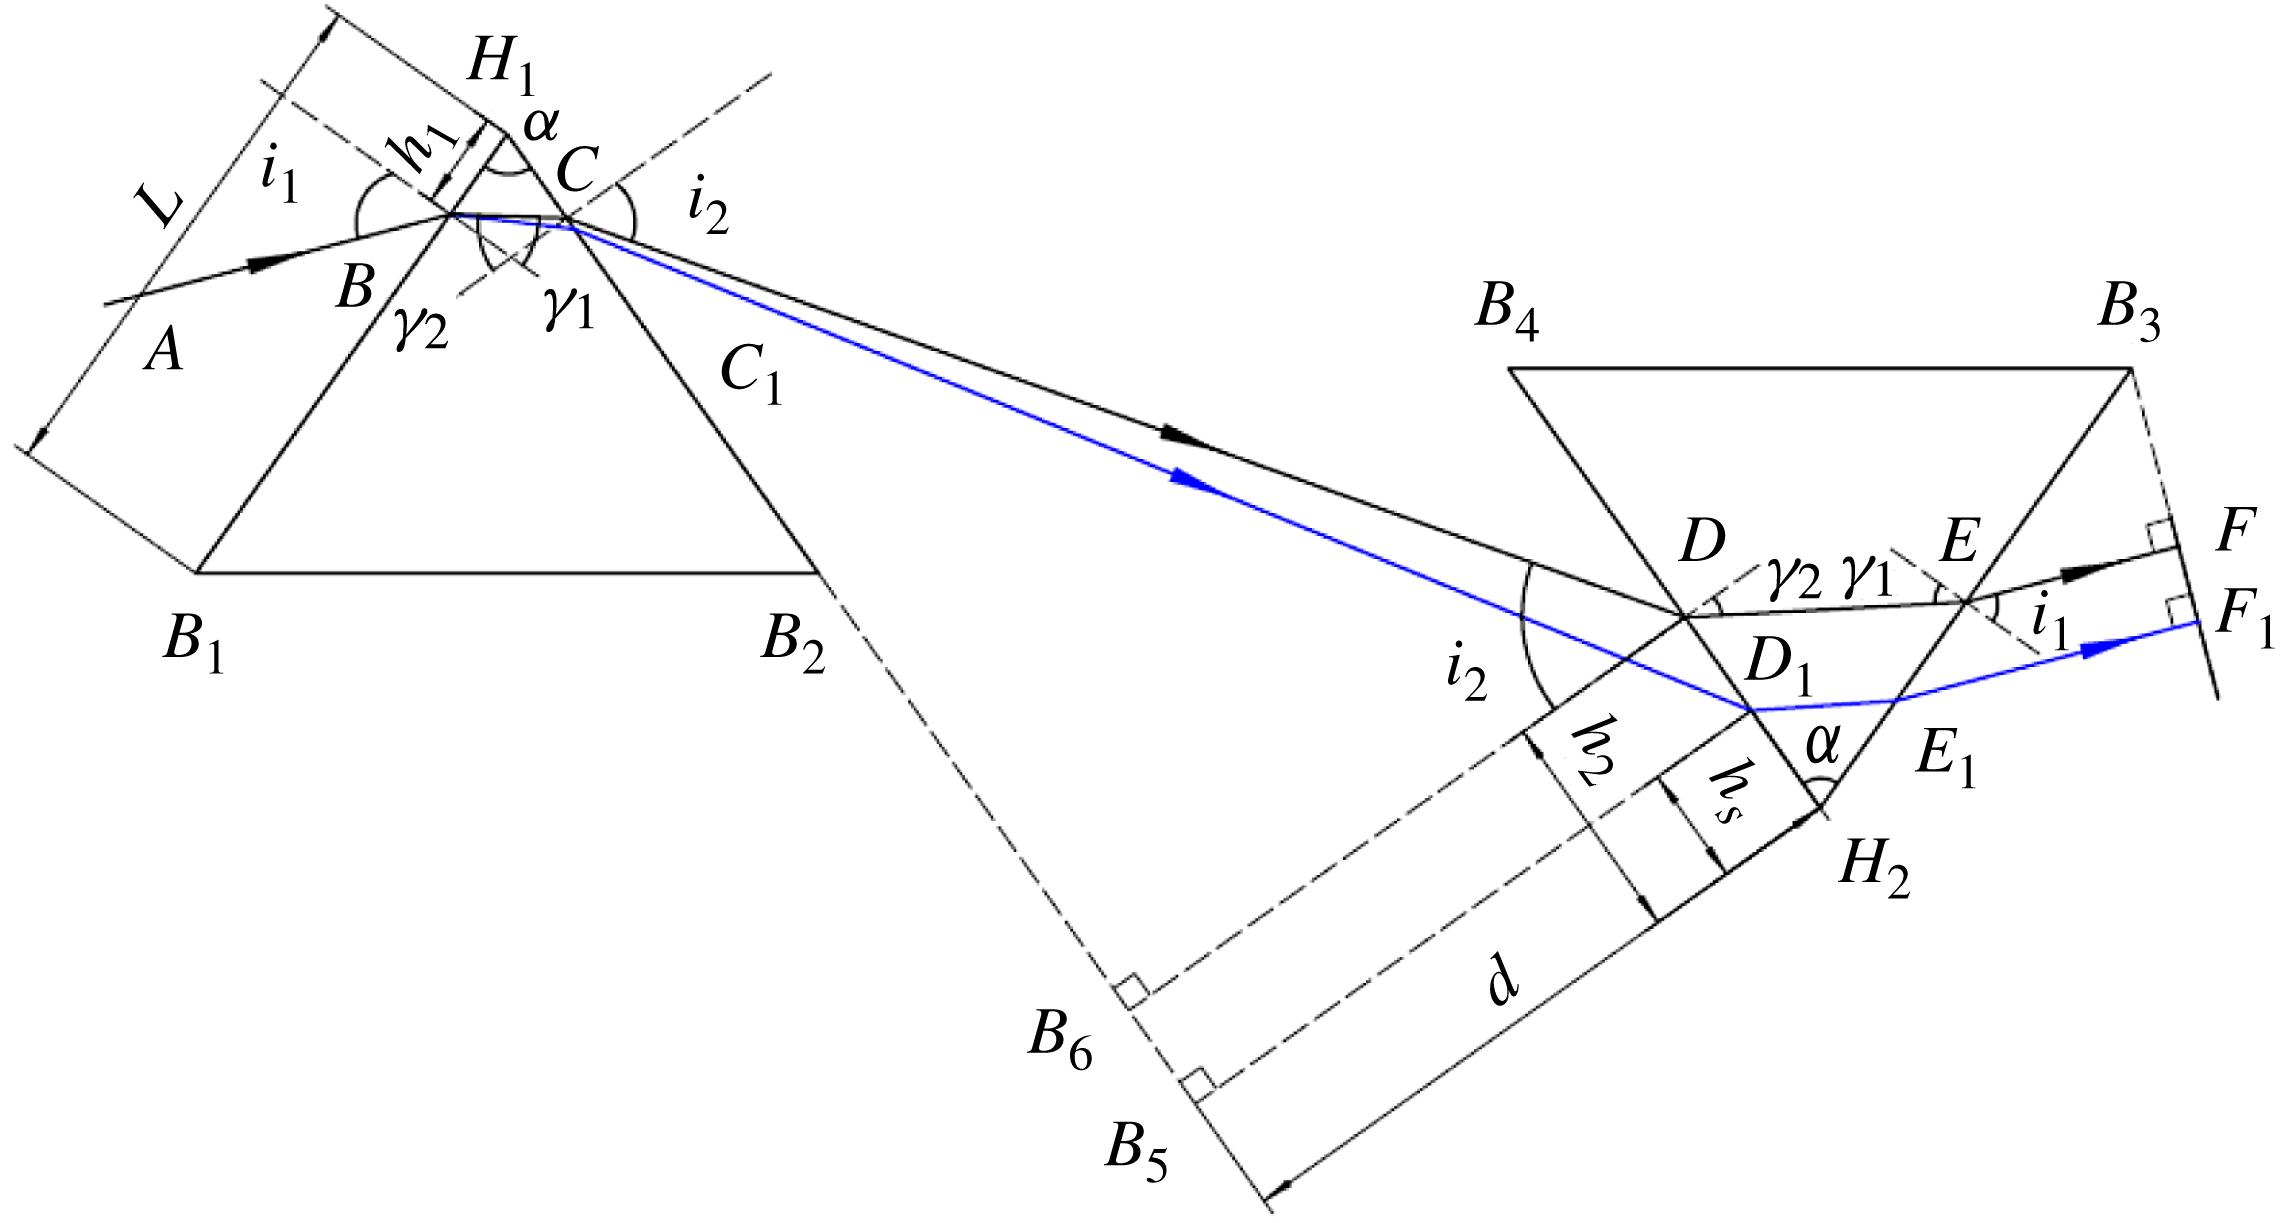 Ray-tracing sketch for a pair of identical isosceles prisms in a parallel face configuration.